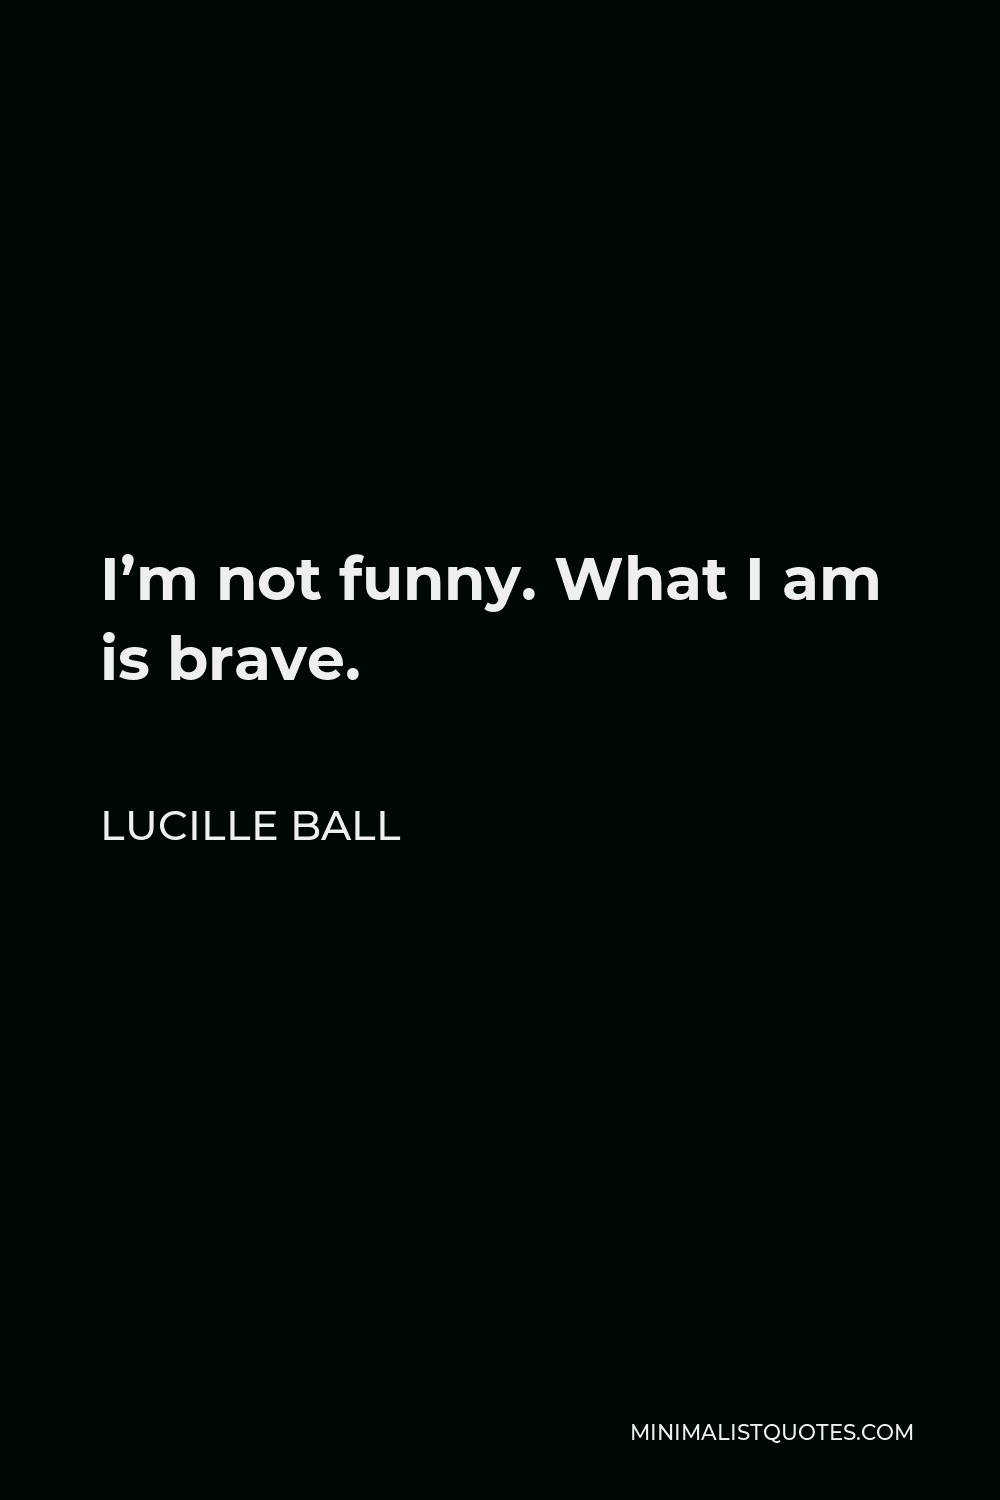 Lucille Ball Quote - I’m not funny. What I am is brave.